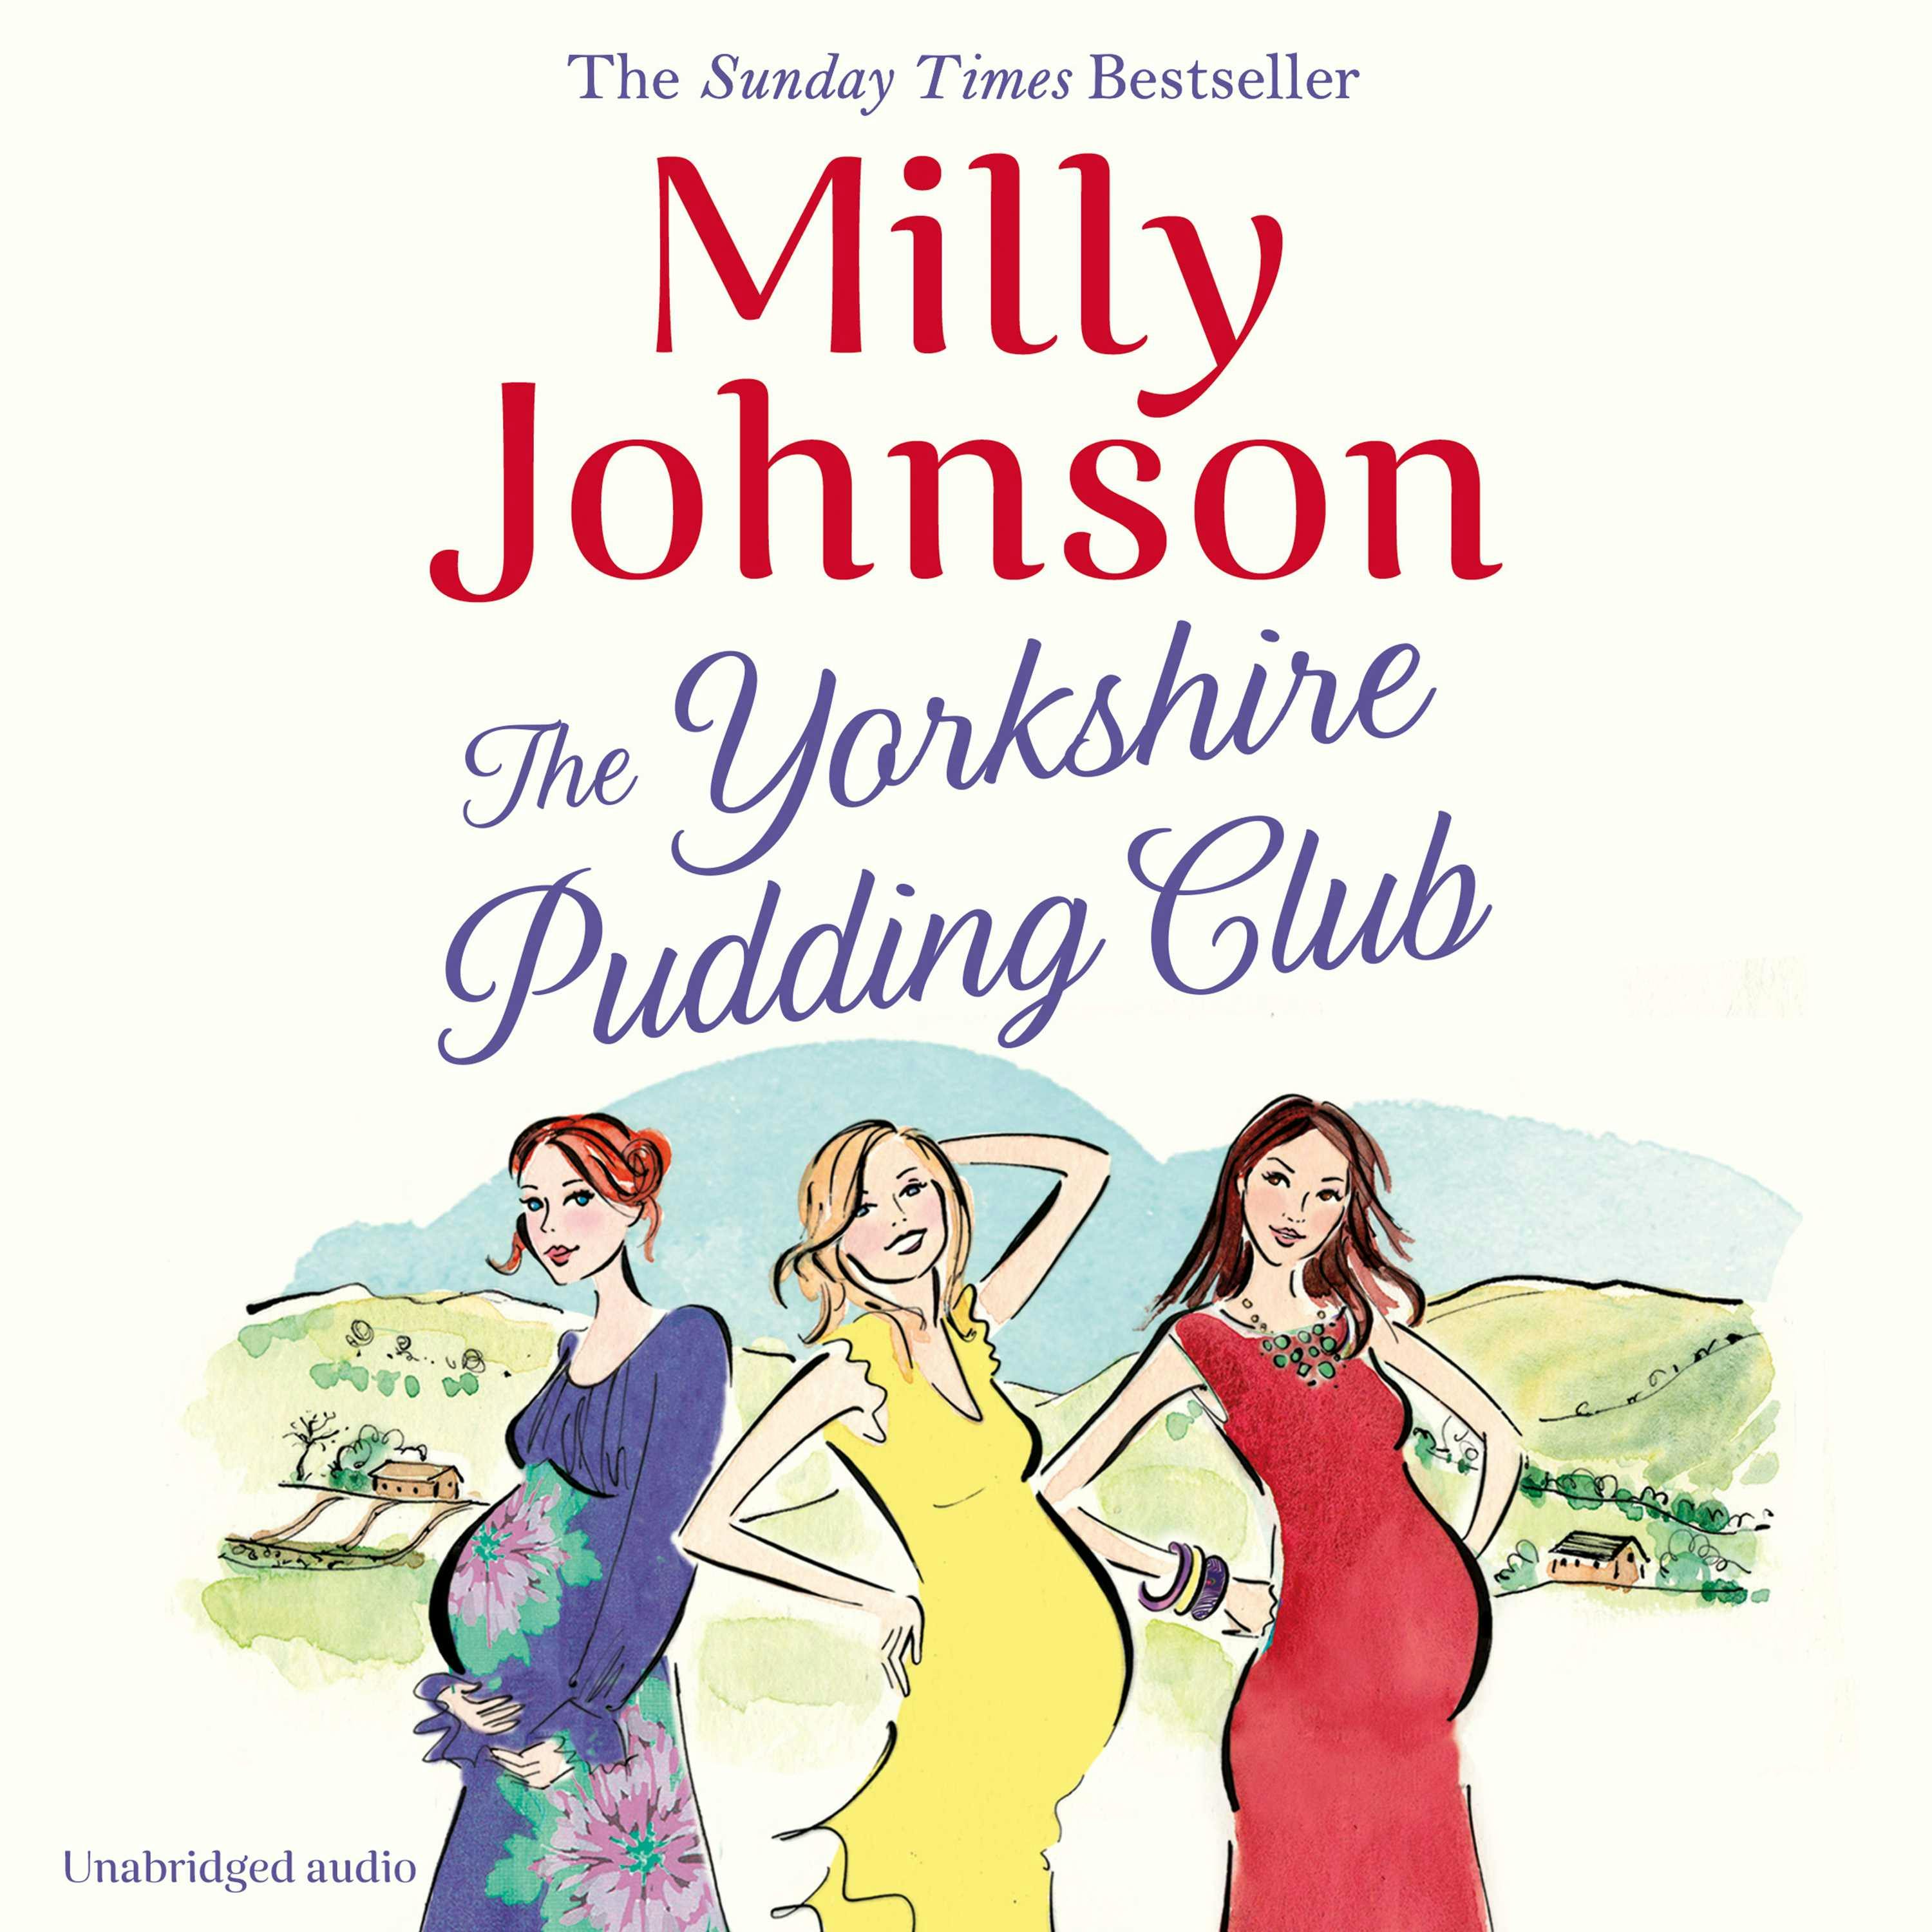 The Yorkshire Pudding Club - Milly Johnson